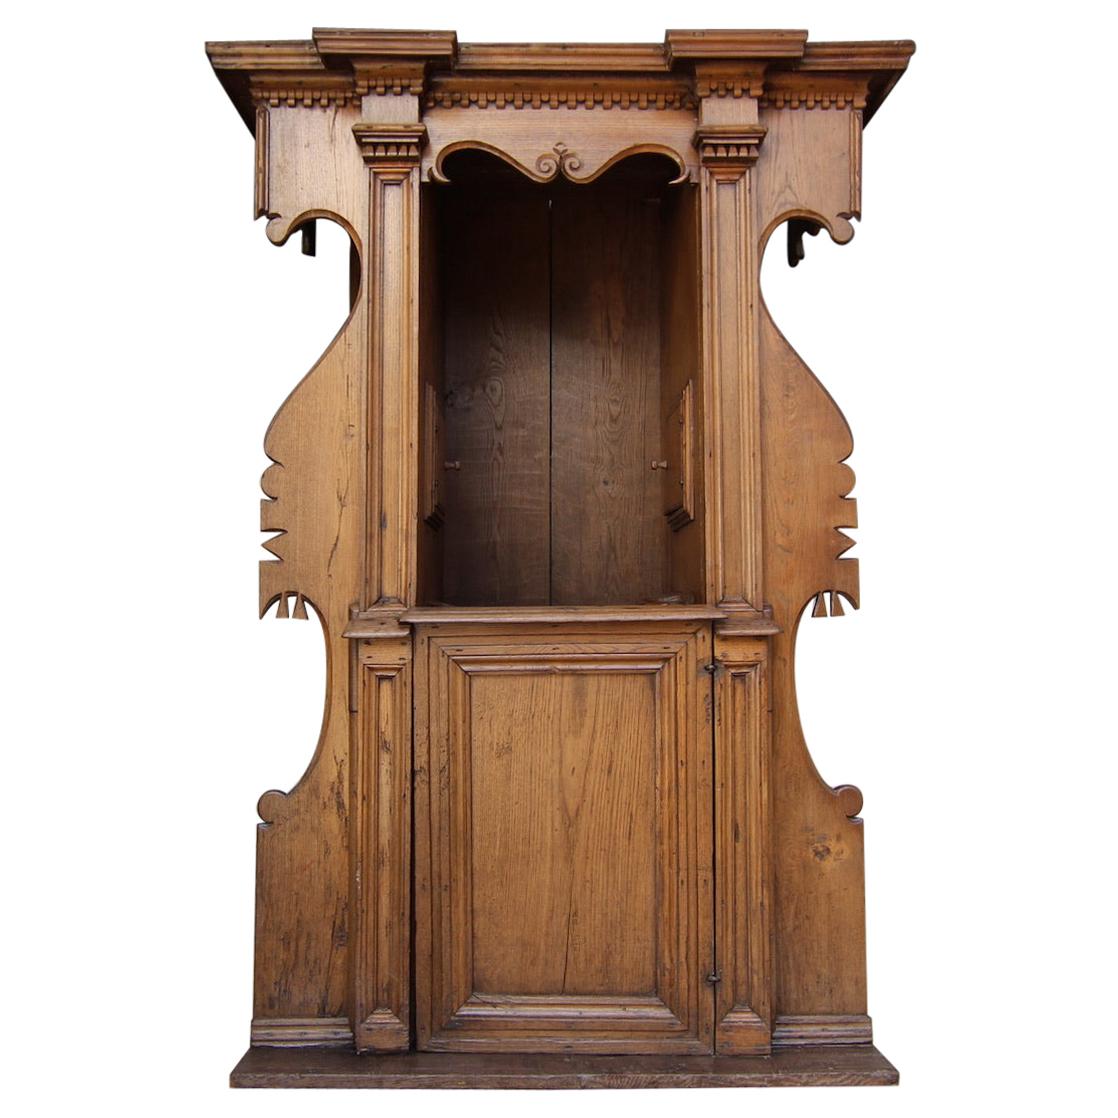 17th Century Tuscan Renaissance Style Confessional Made of Oak